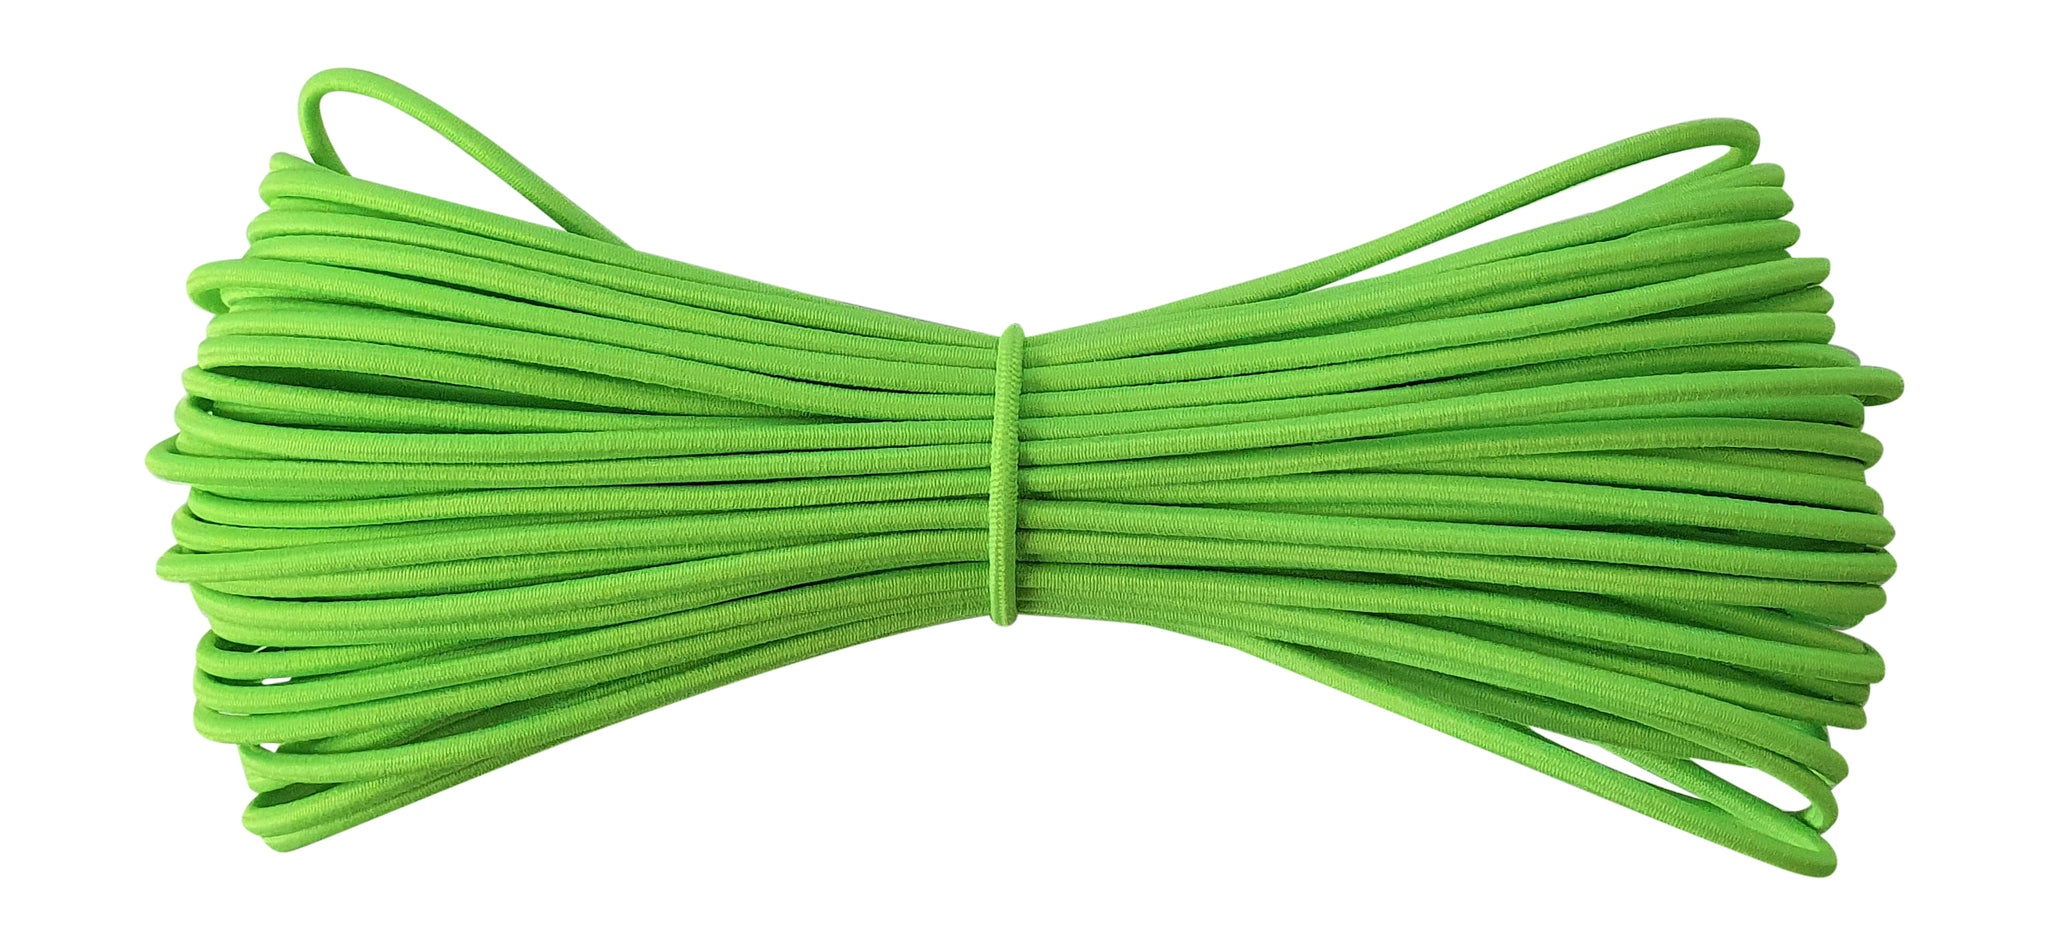 Fabmania round elastic cord neon / florescent lime green 2 mm